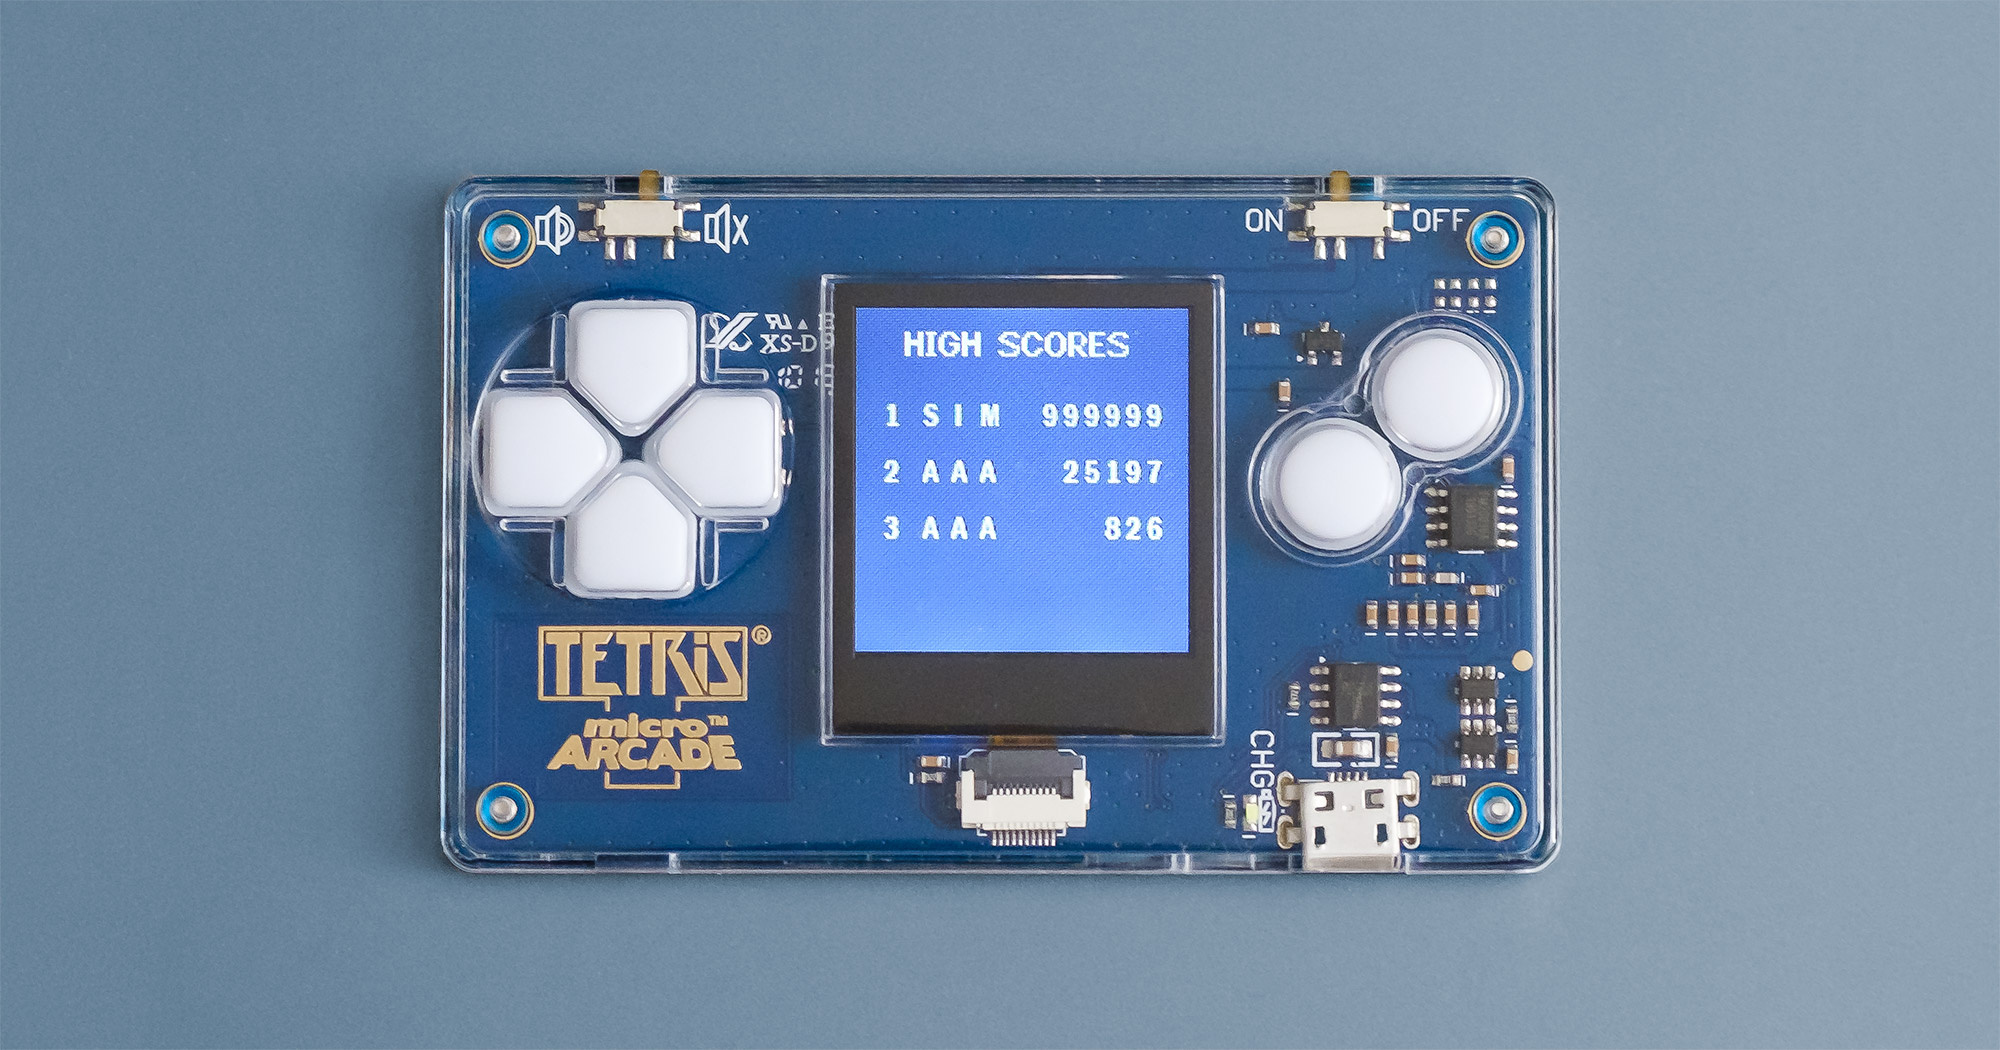 The Tiny Arcade Tetris device laying flat on a surface with the highscores screen showing. The screen shows the title 'High Scores' and lists the following three scores: 1 SIM 999999, 2 AAA 25197, 3 AAA 826.